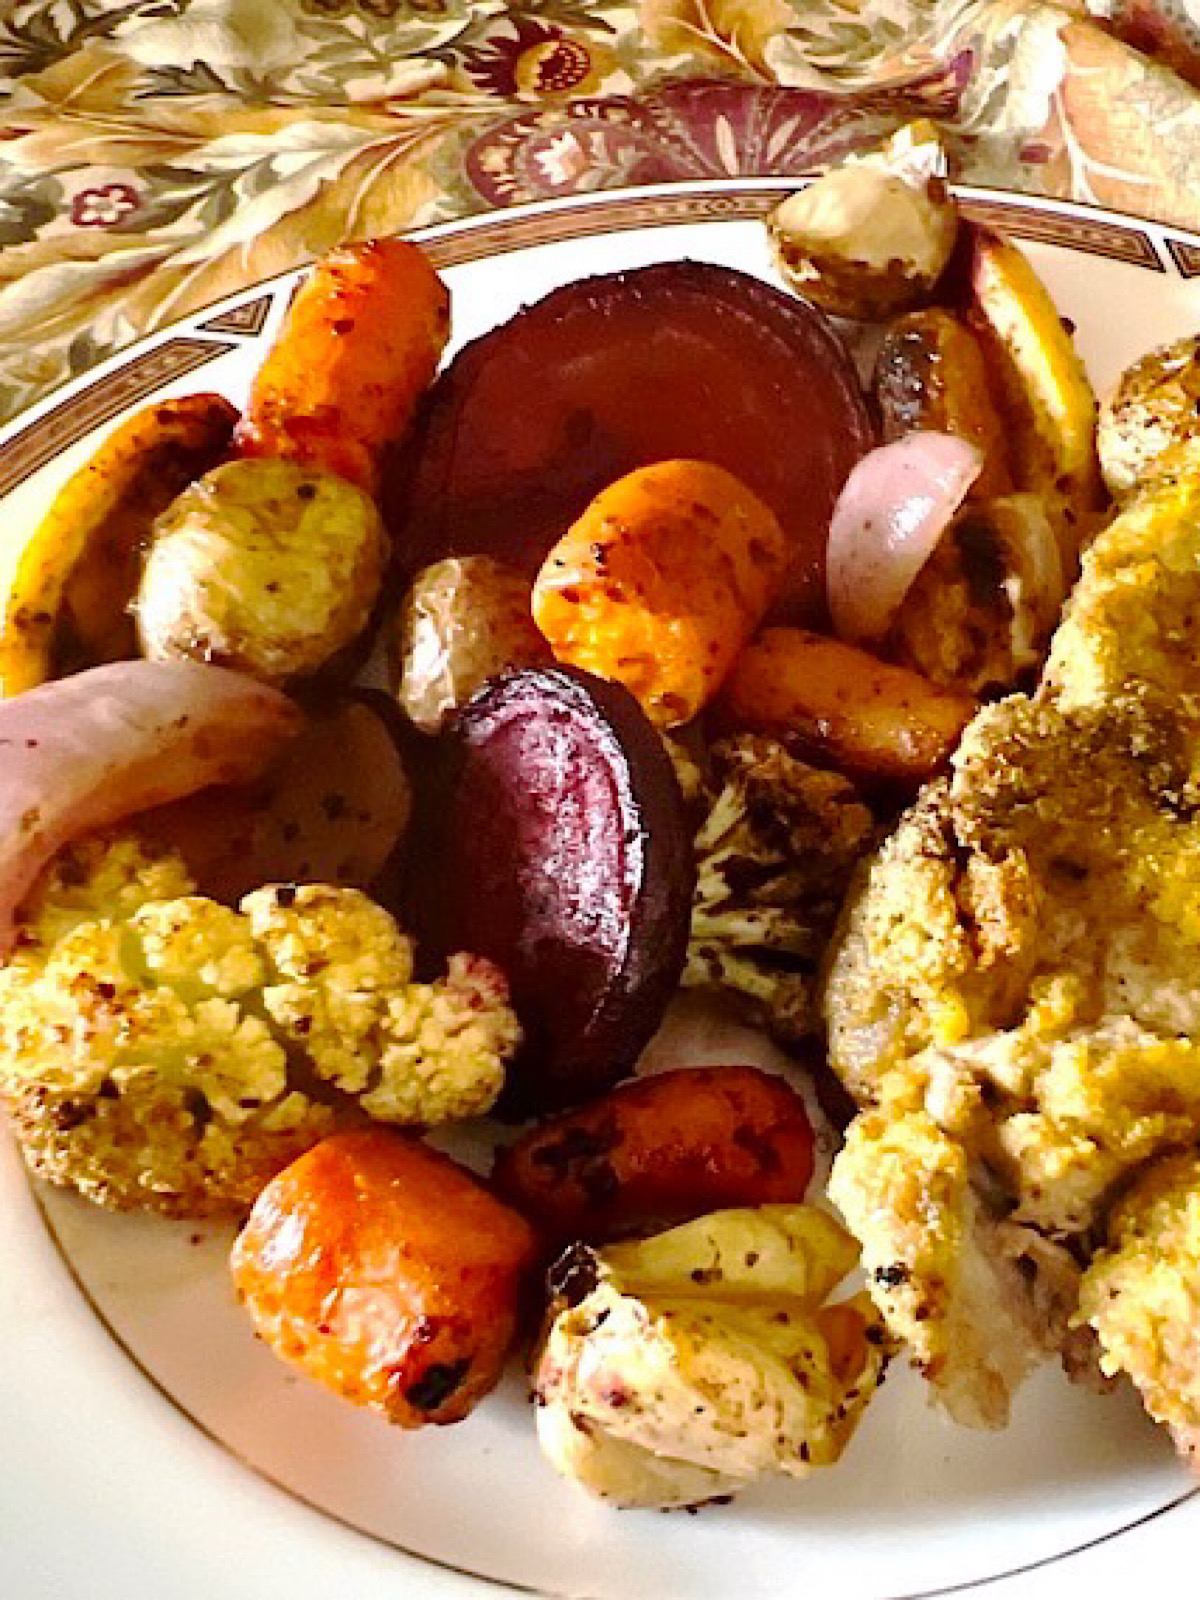 Medley of roasted root vegetables on a plate from a sheet pan method of cooking.